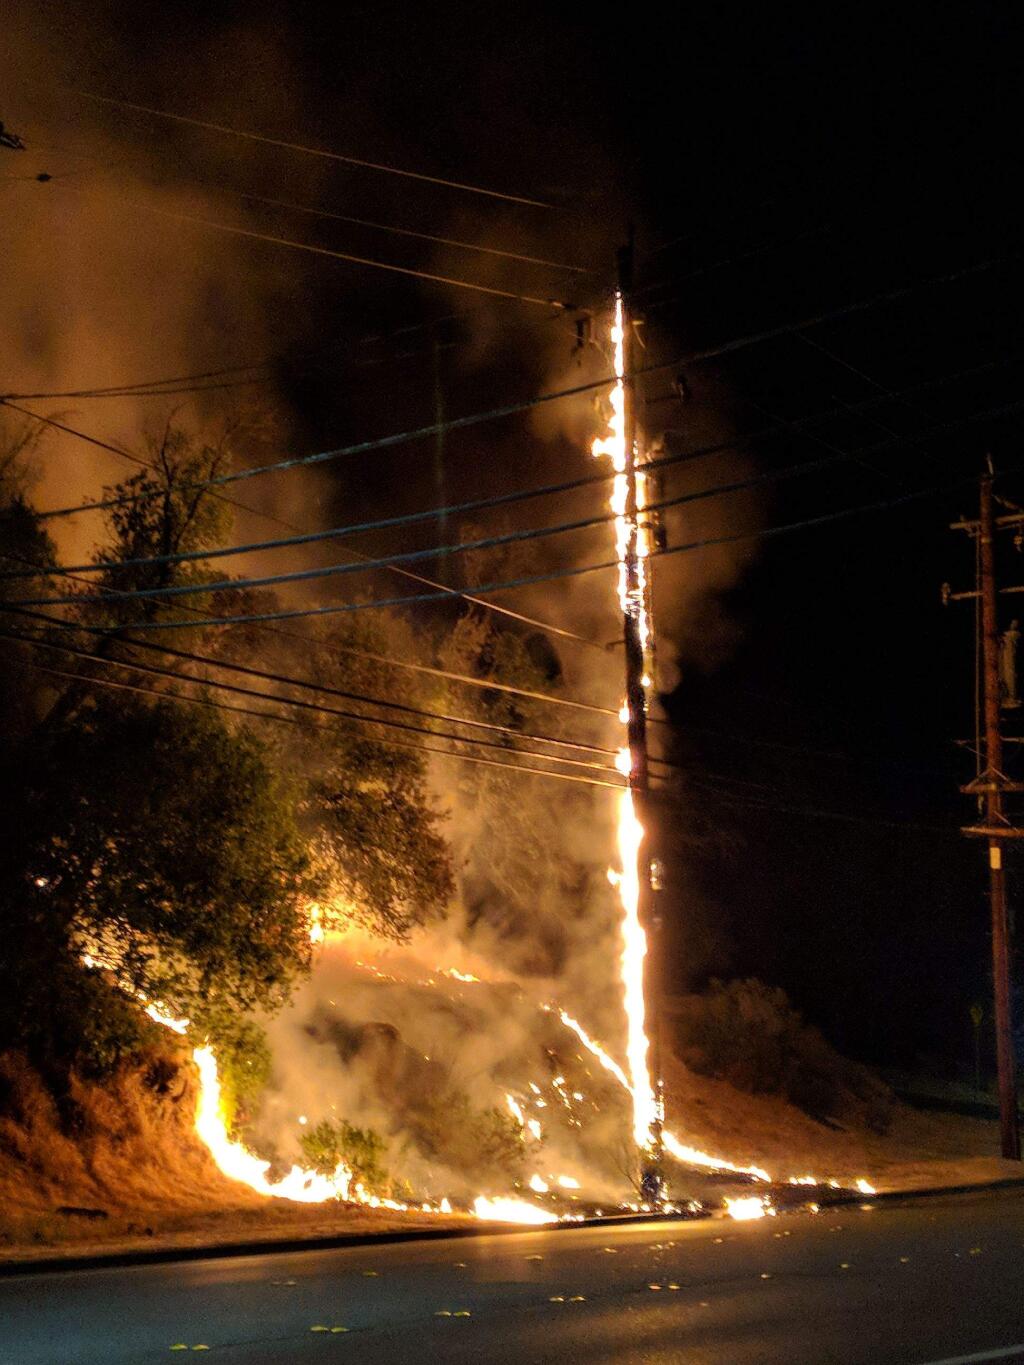 A failed PG&E voltage regulator caused a small grass and brush fire near Howarth Park Wednesday evening, temporarily knocking out power to thousands of customers near Summerfield Road and Sonoma Avenue, officials said. (Photo: Jenny L. Van Sistine)